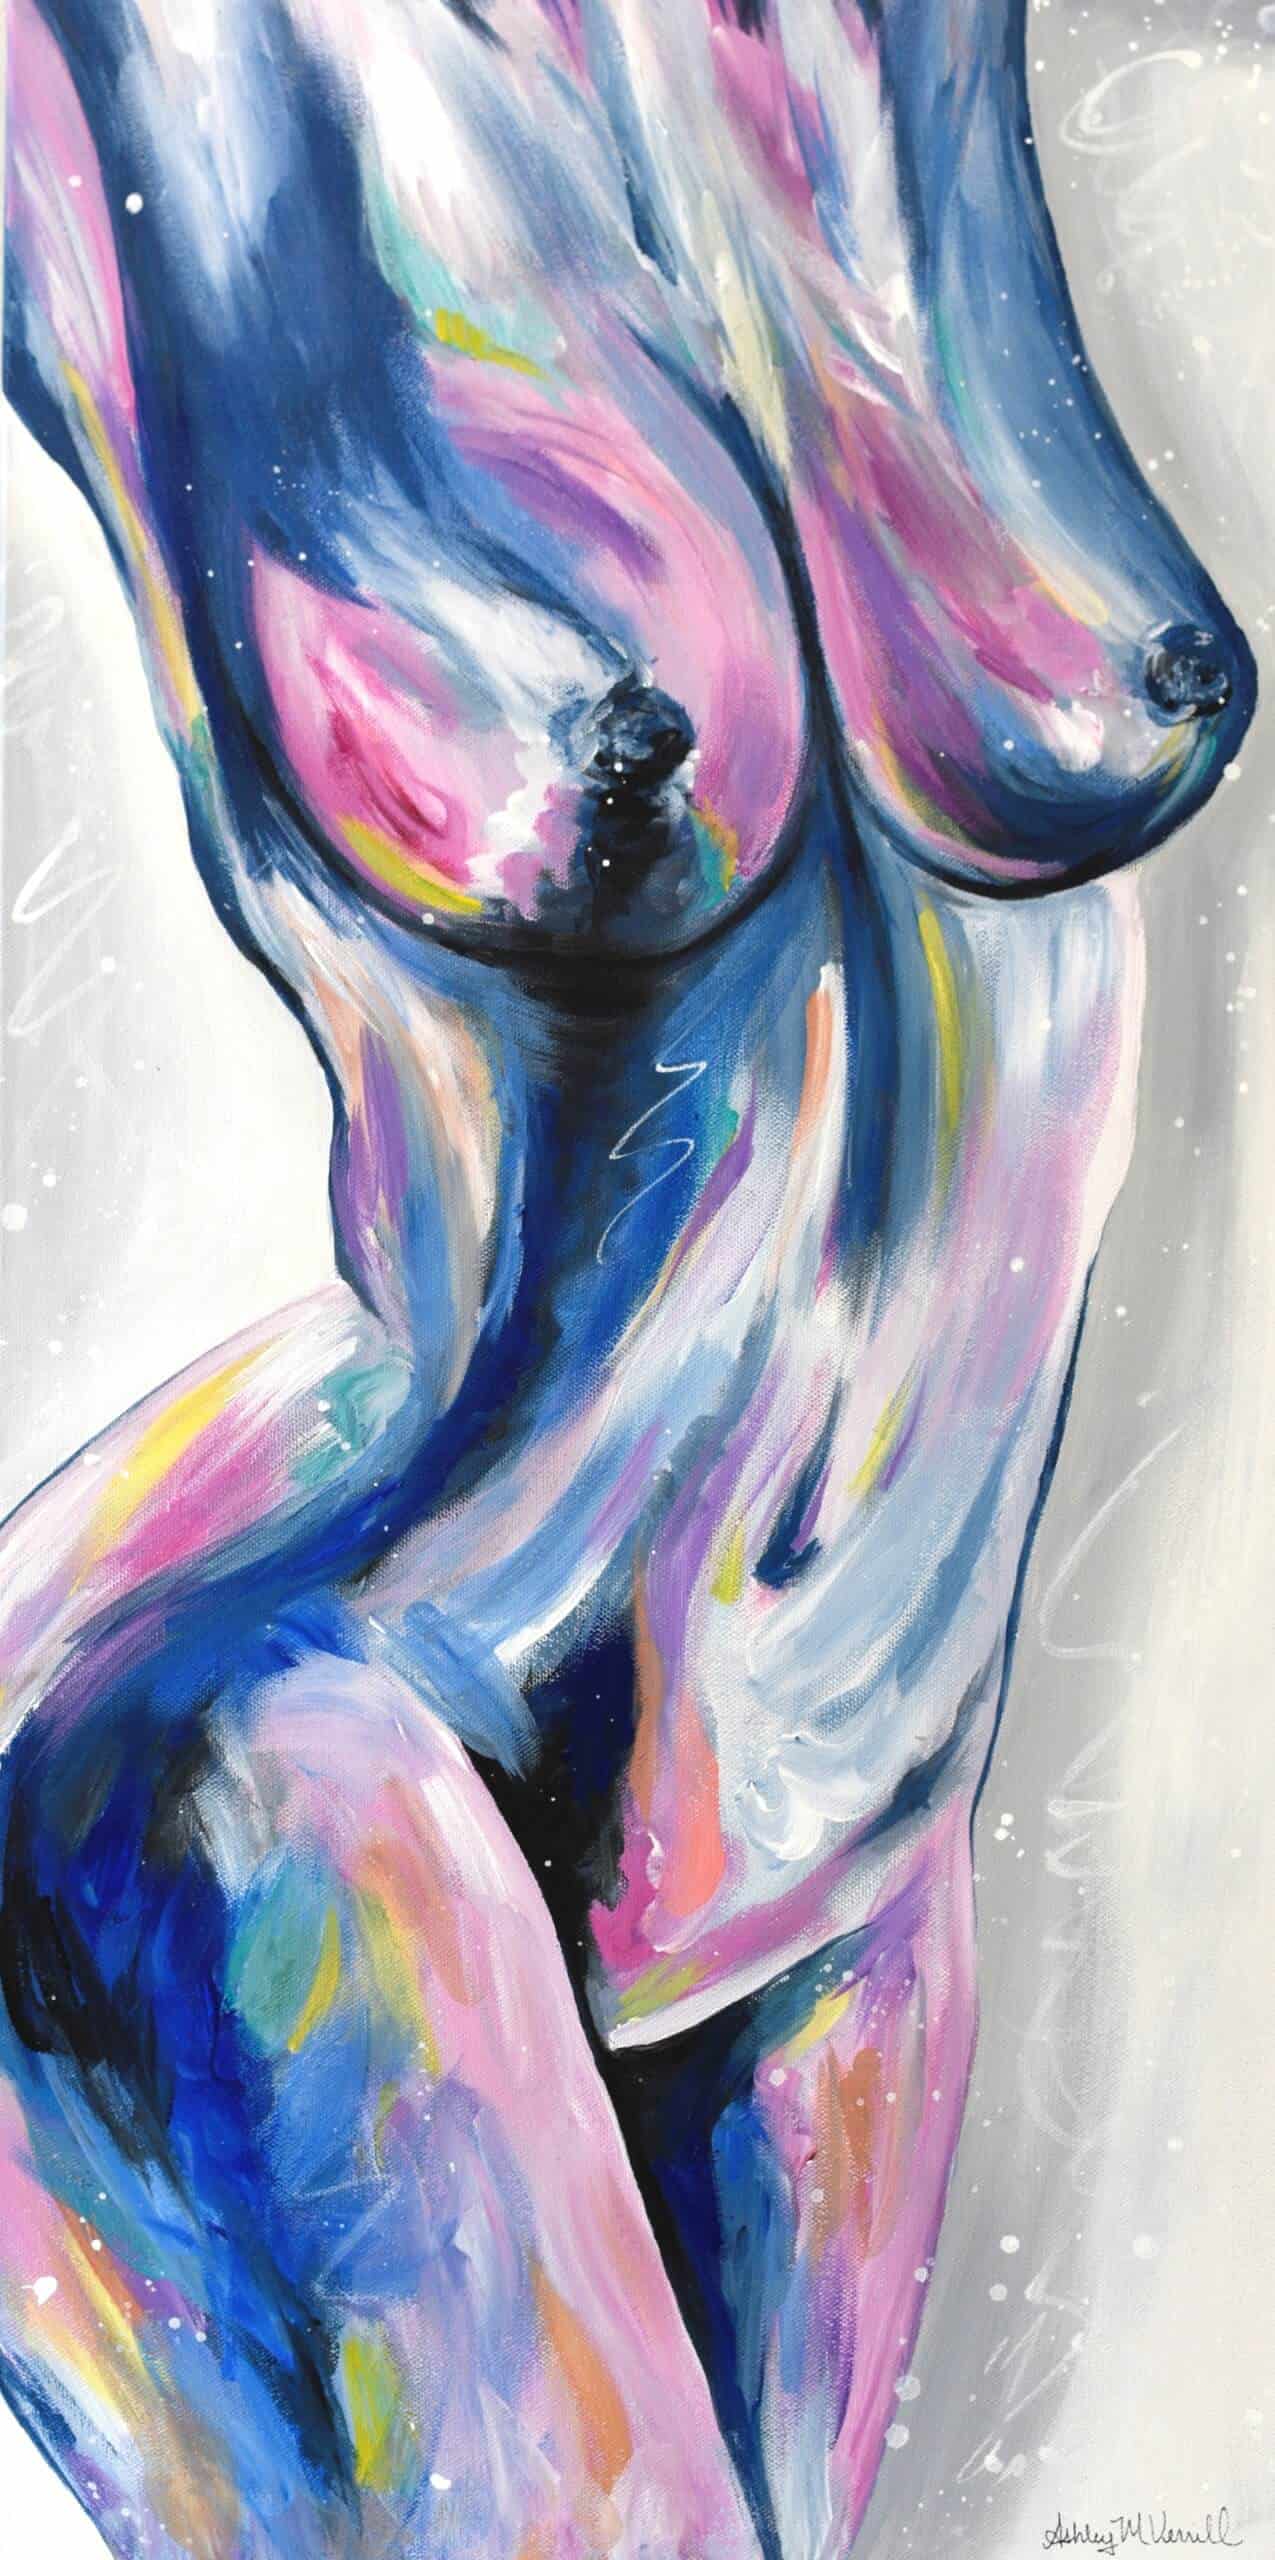 Female Figure Painting with Abstract Use of Colors and Lines